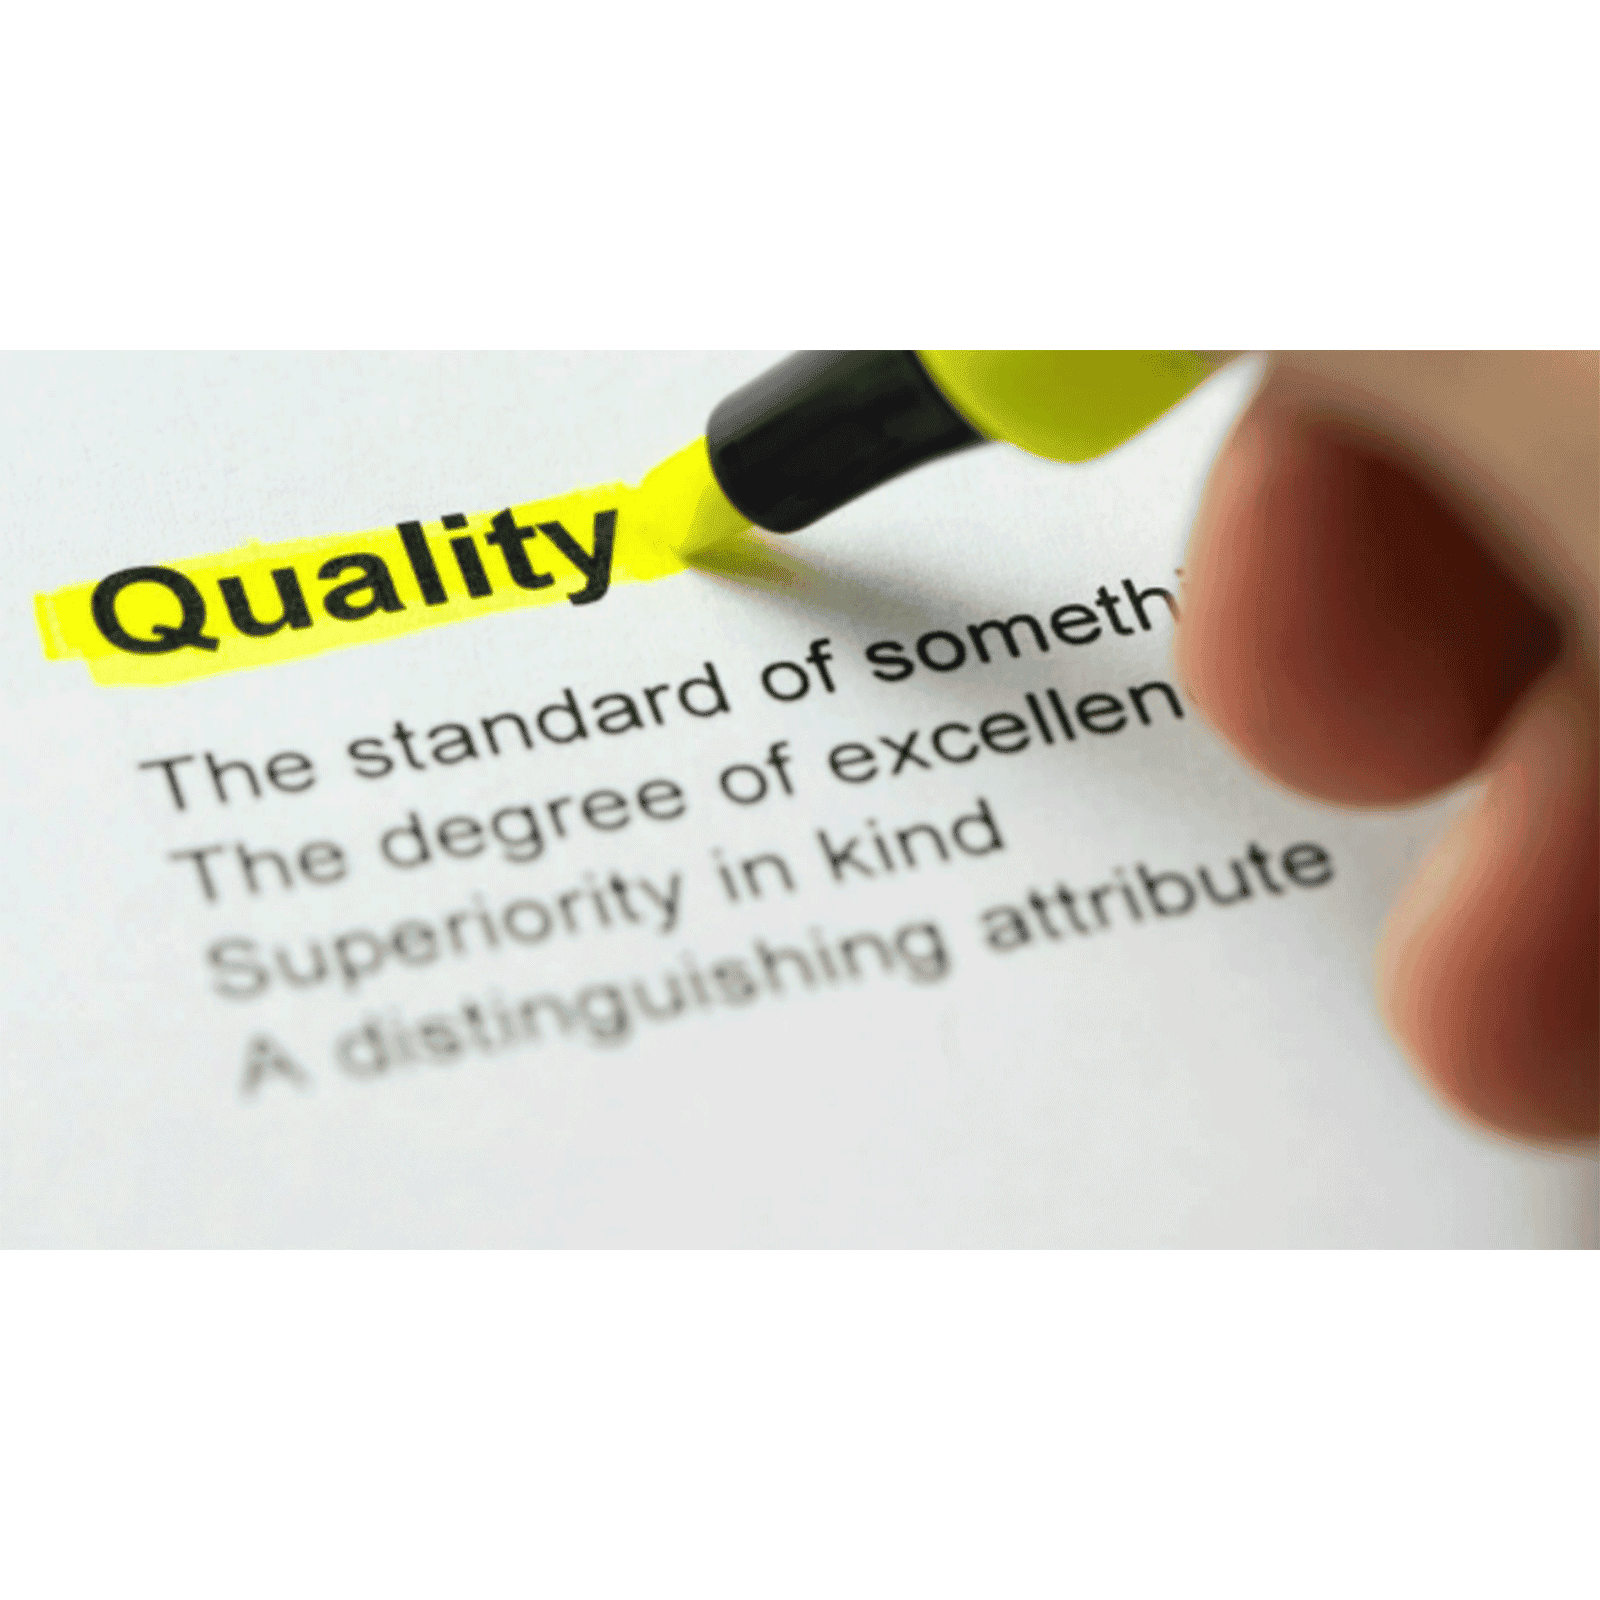 Close up of person highlighting the word "quality" in book